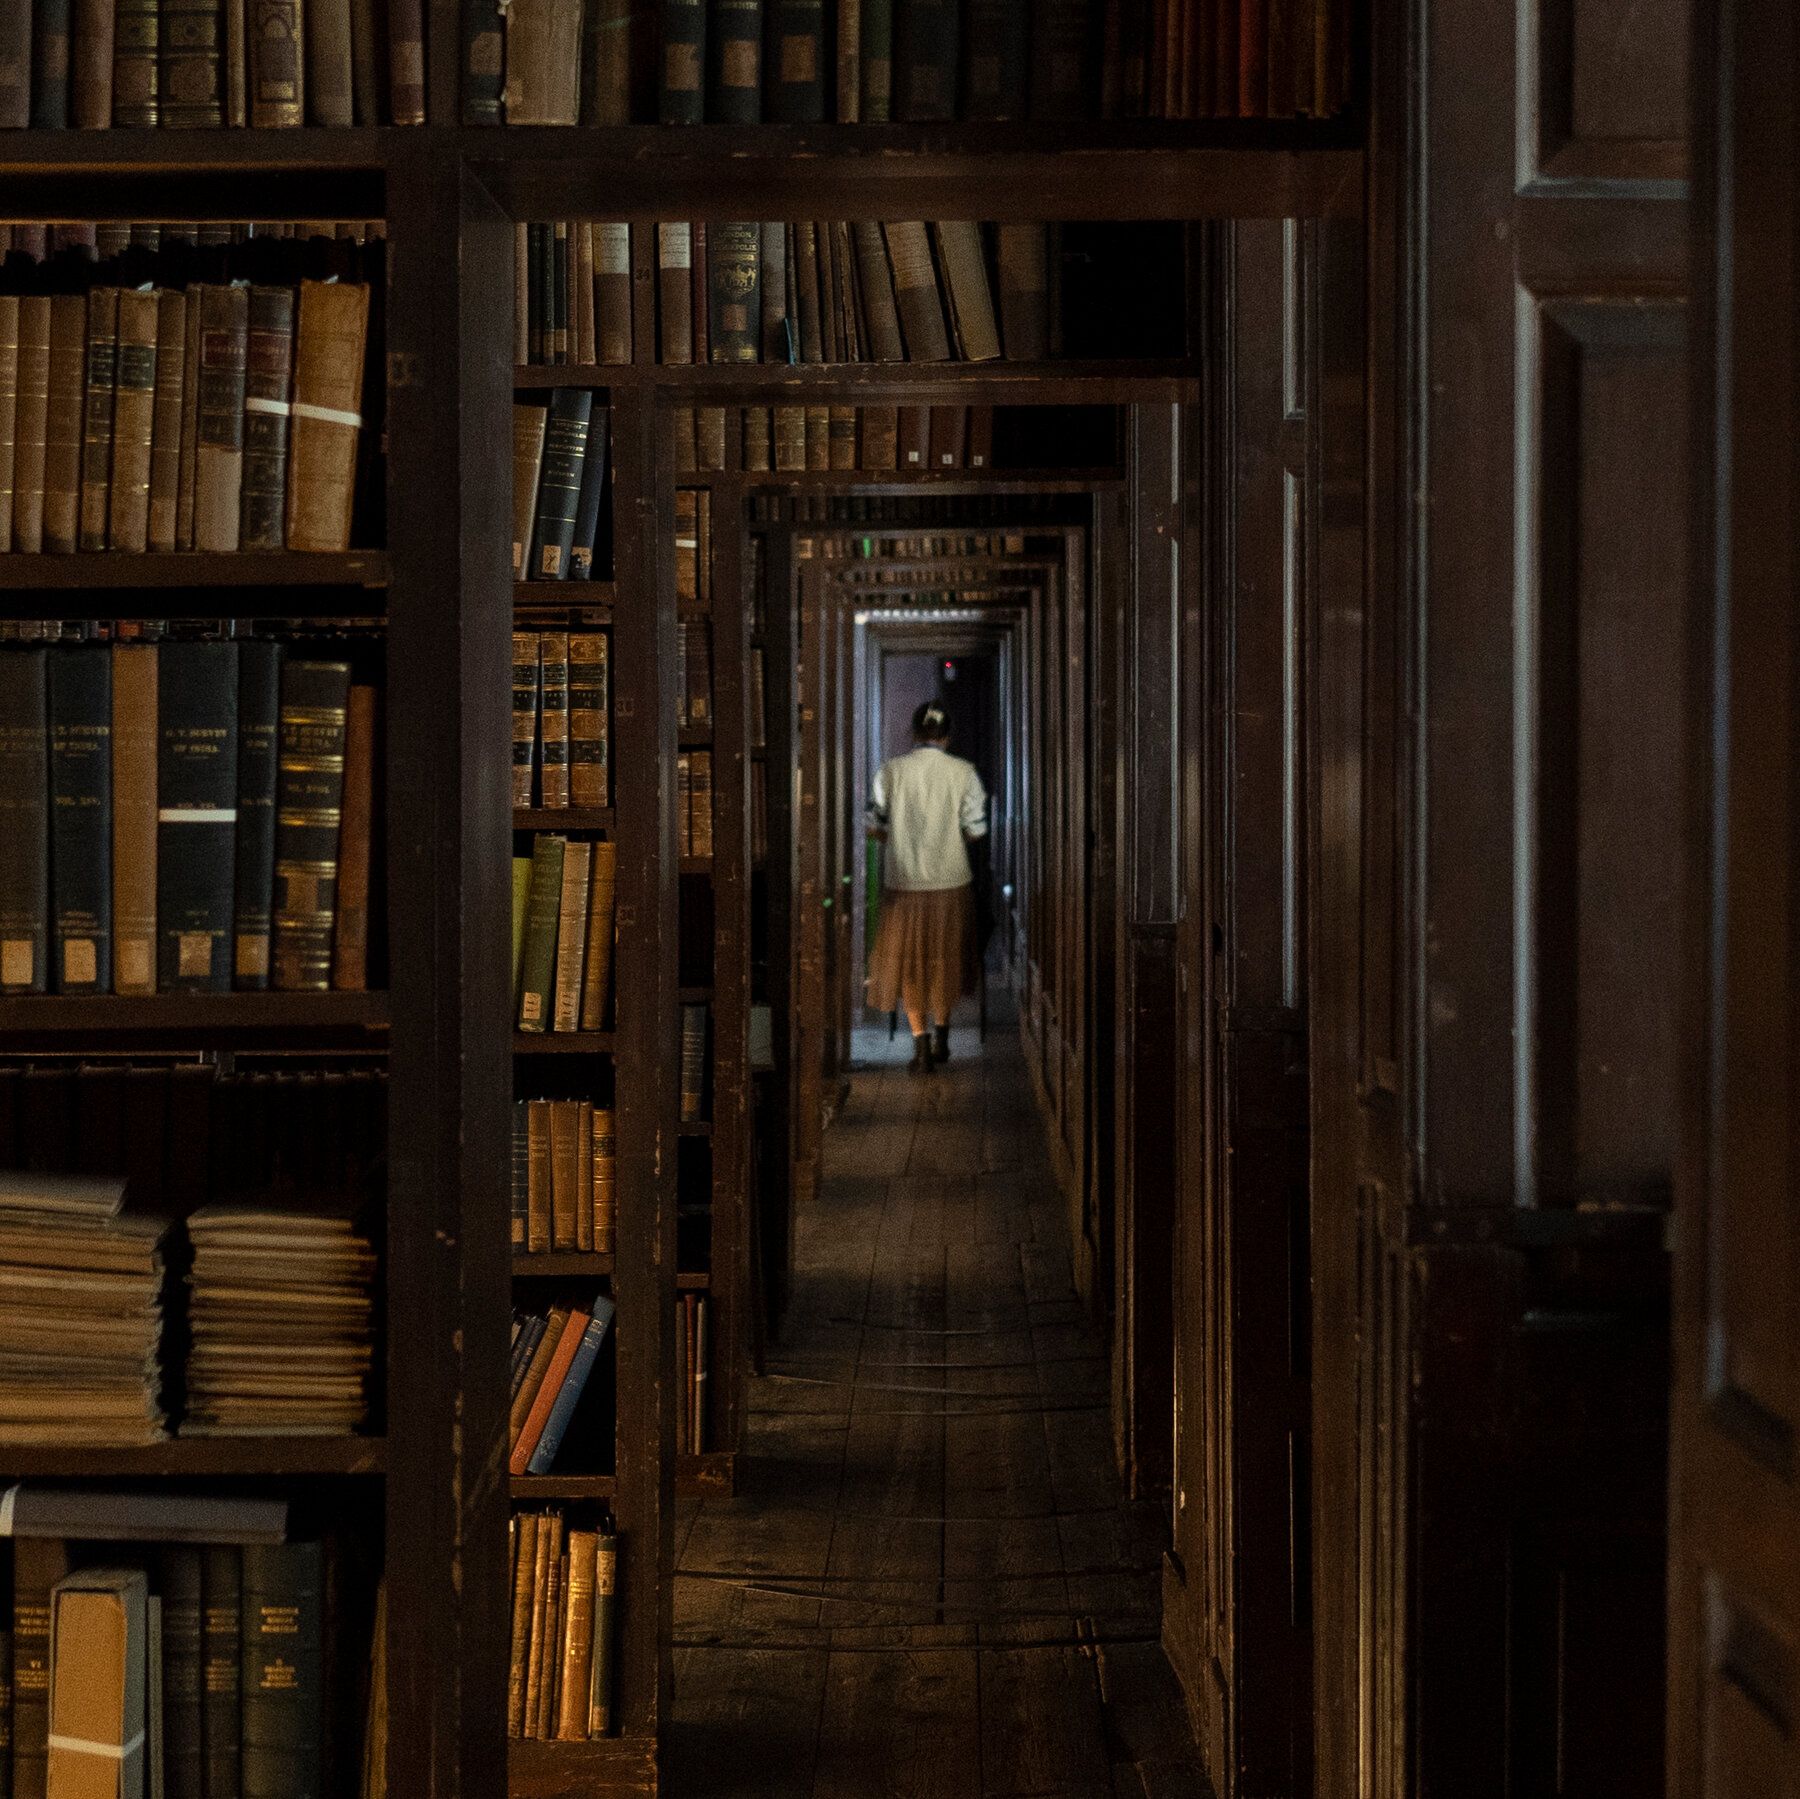 A woman in a white shirt and brown skirt stands in a darkened library. - Dark academia